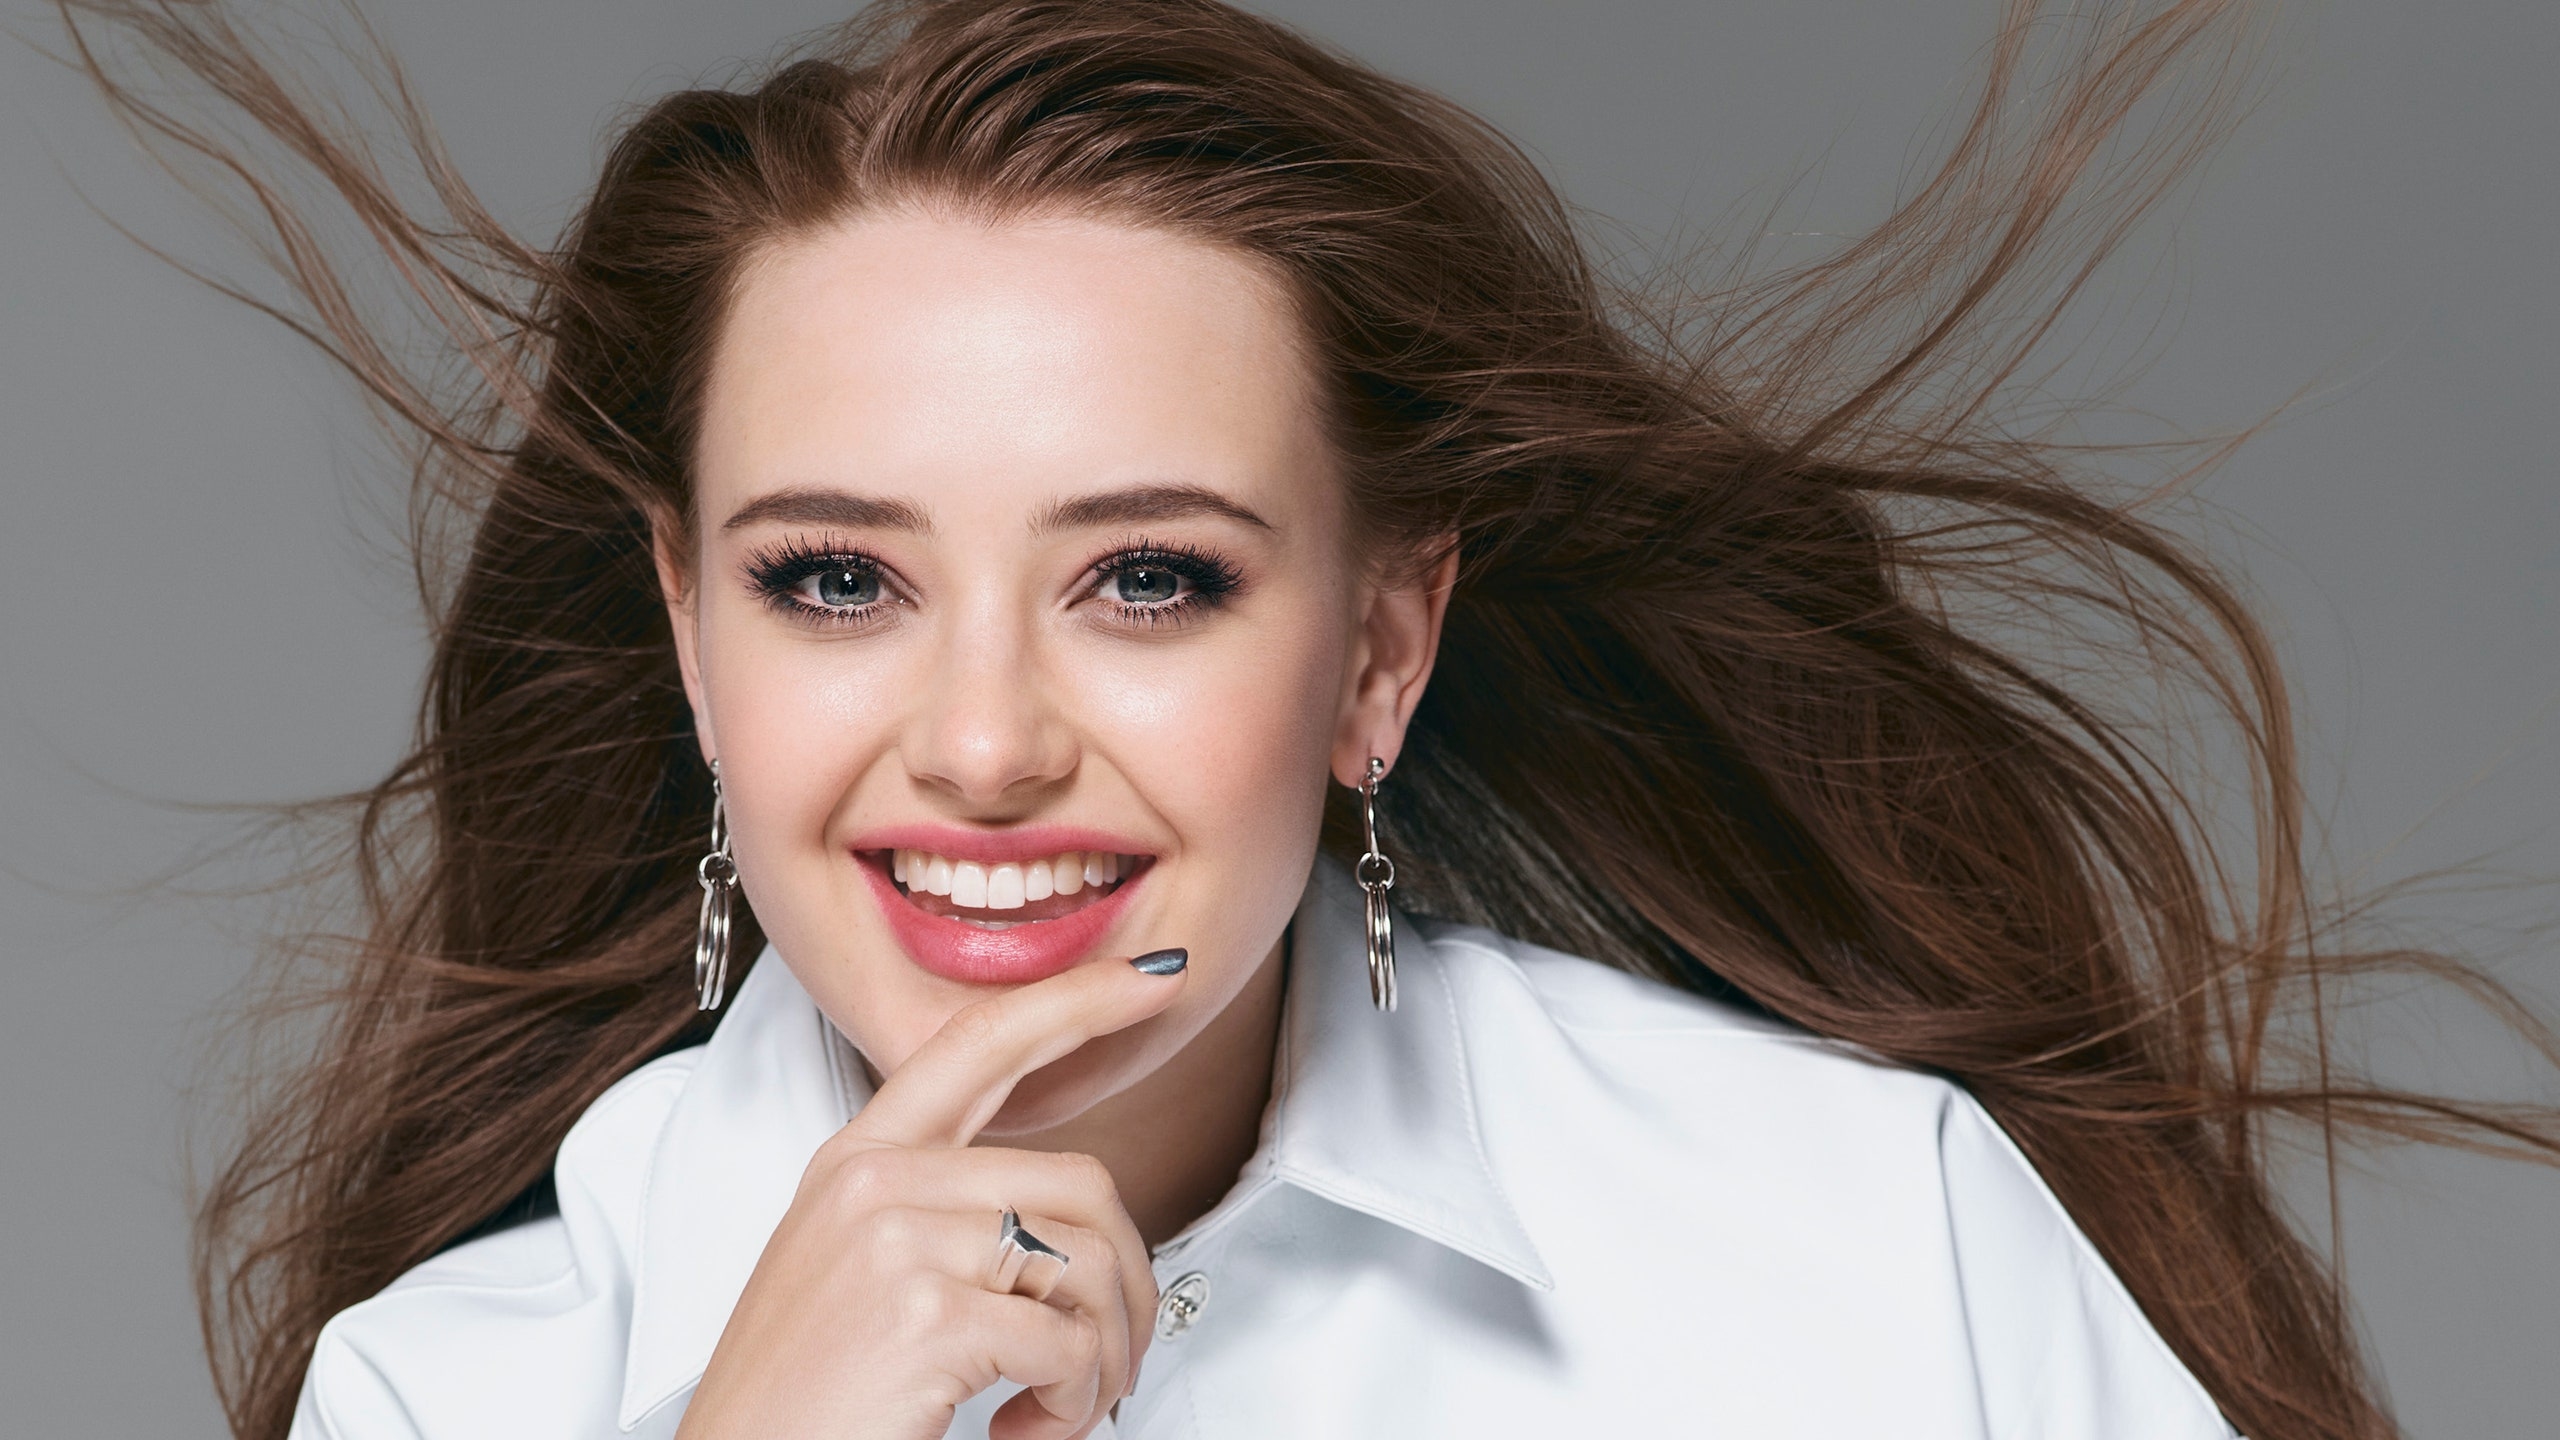 Katherine Langford Smile 2020 Wallpaper, HD Celebrities 4K Wallpapers,  Images, Photos and Background - Wallpapers Den